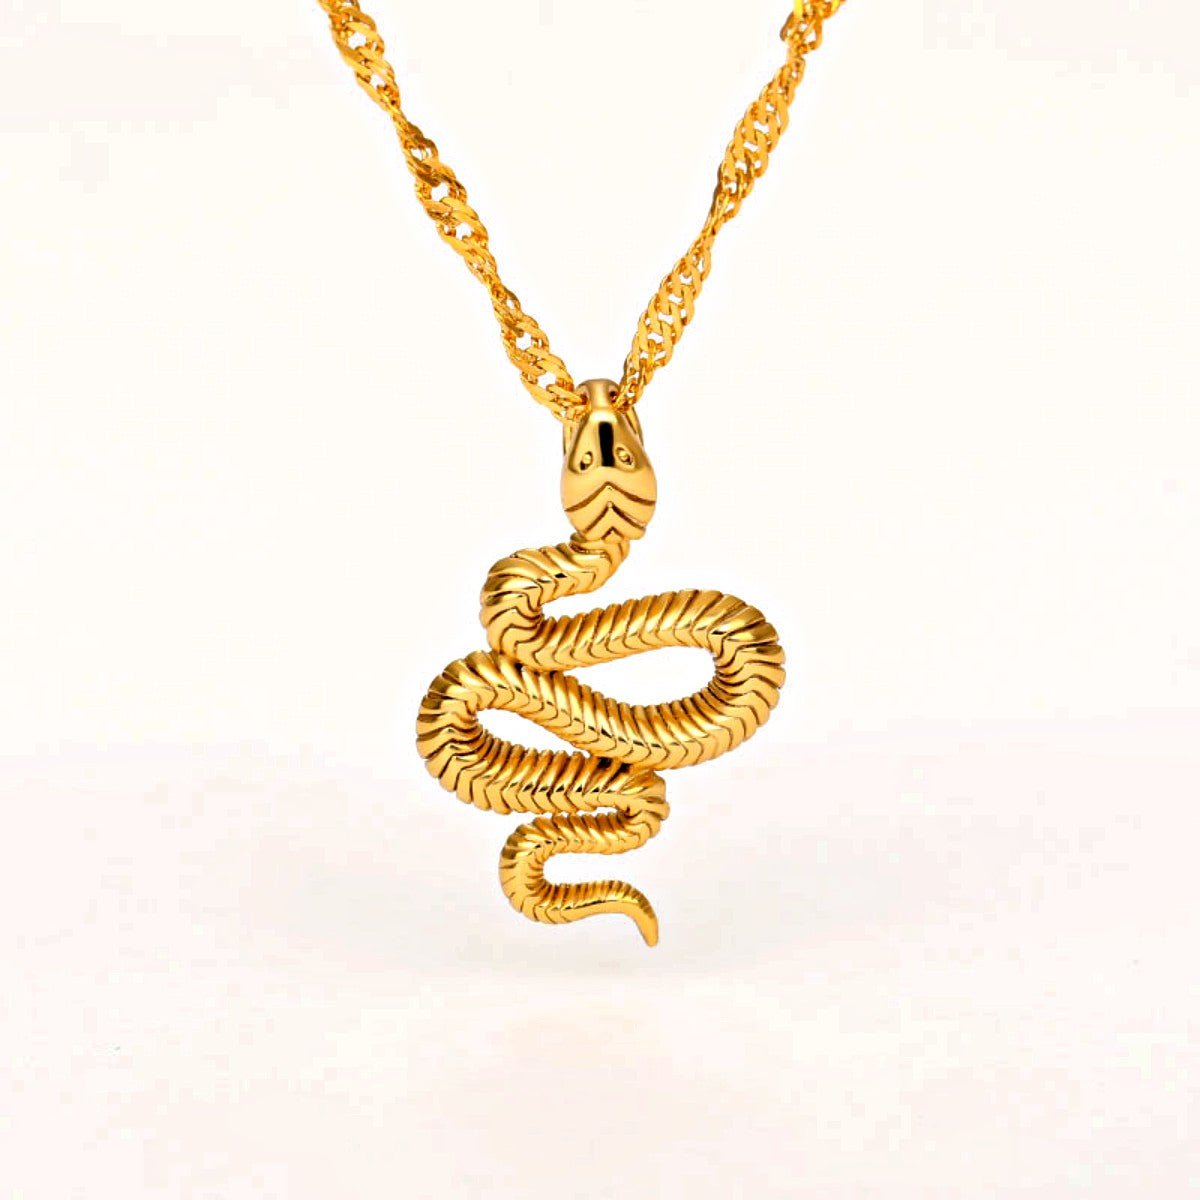 3 Dimensional Stainless Steel Snake Pendant Necklace 